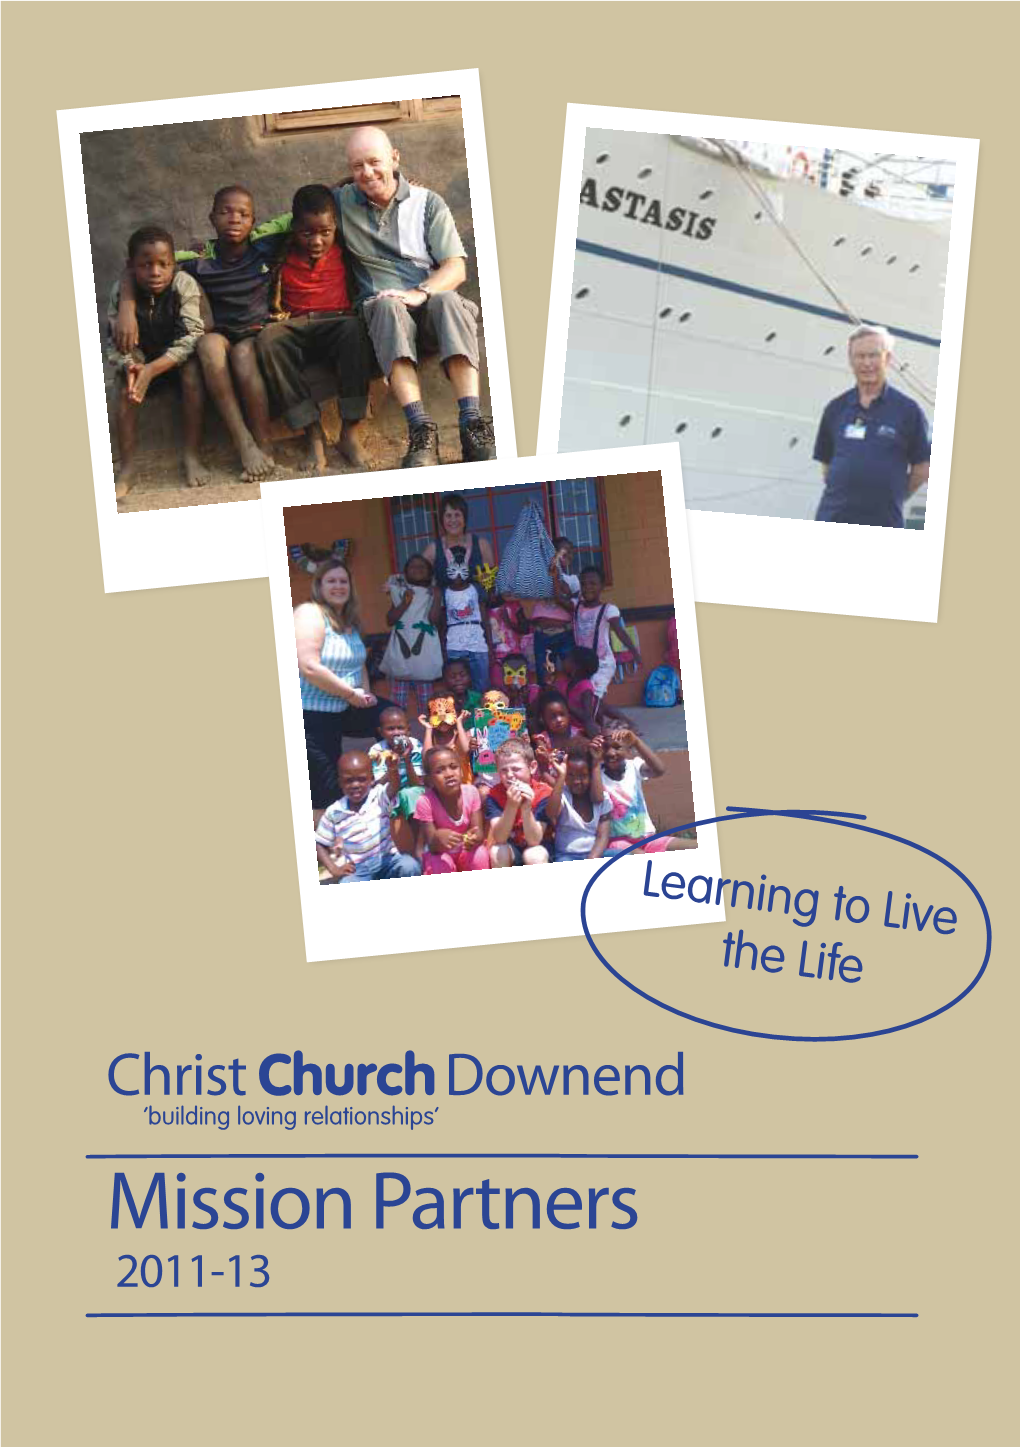 Mission Partners 2011-13